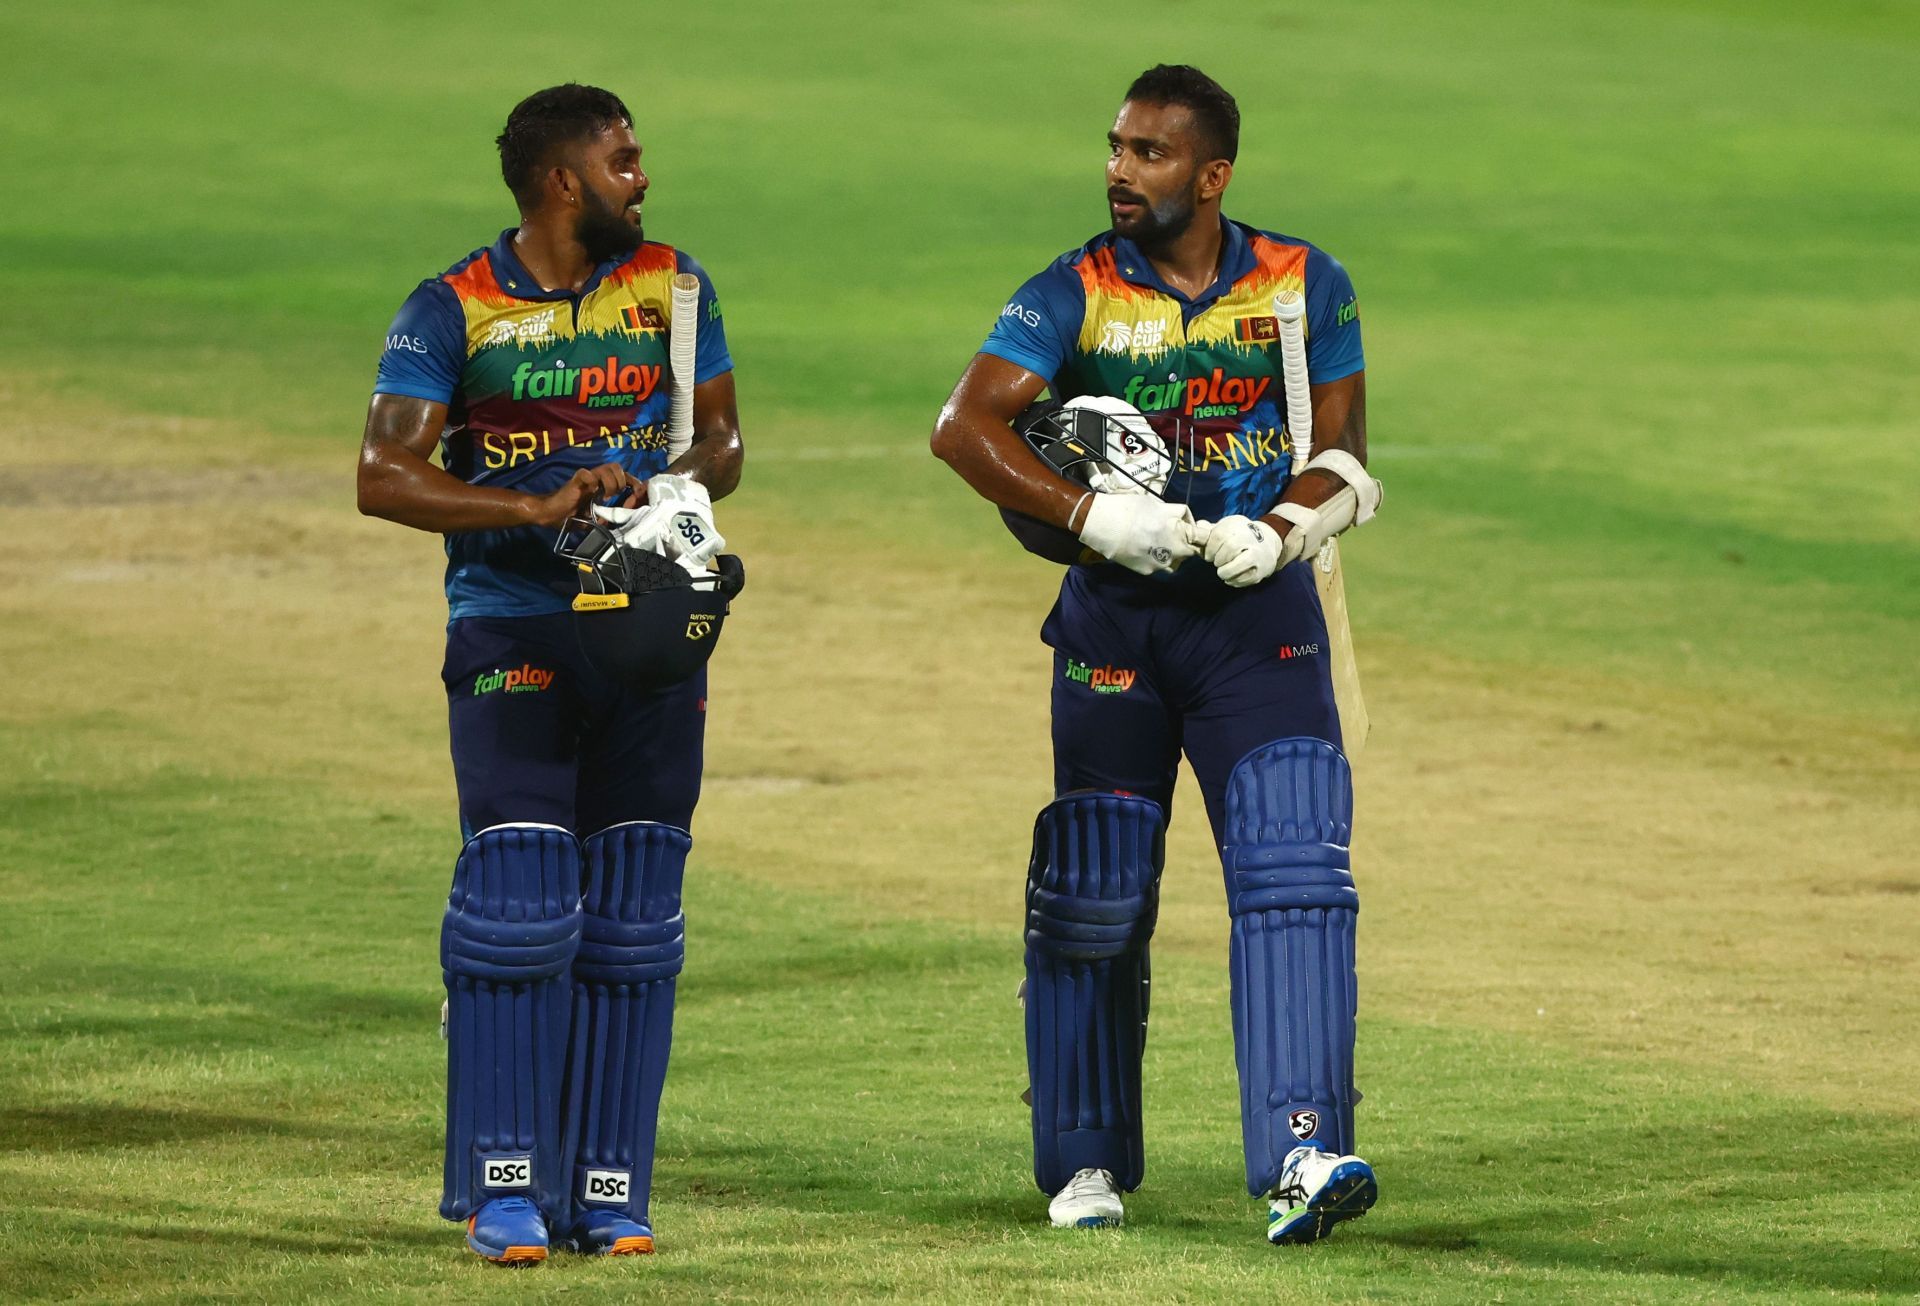 Sri Lanka have recorded two record-breaking chases in their last two games